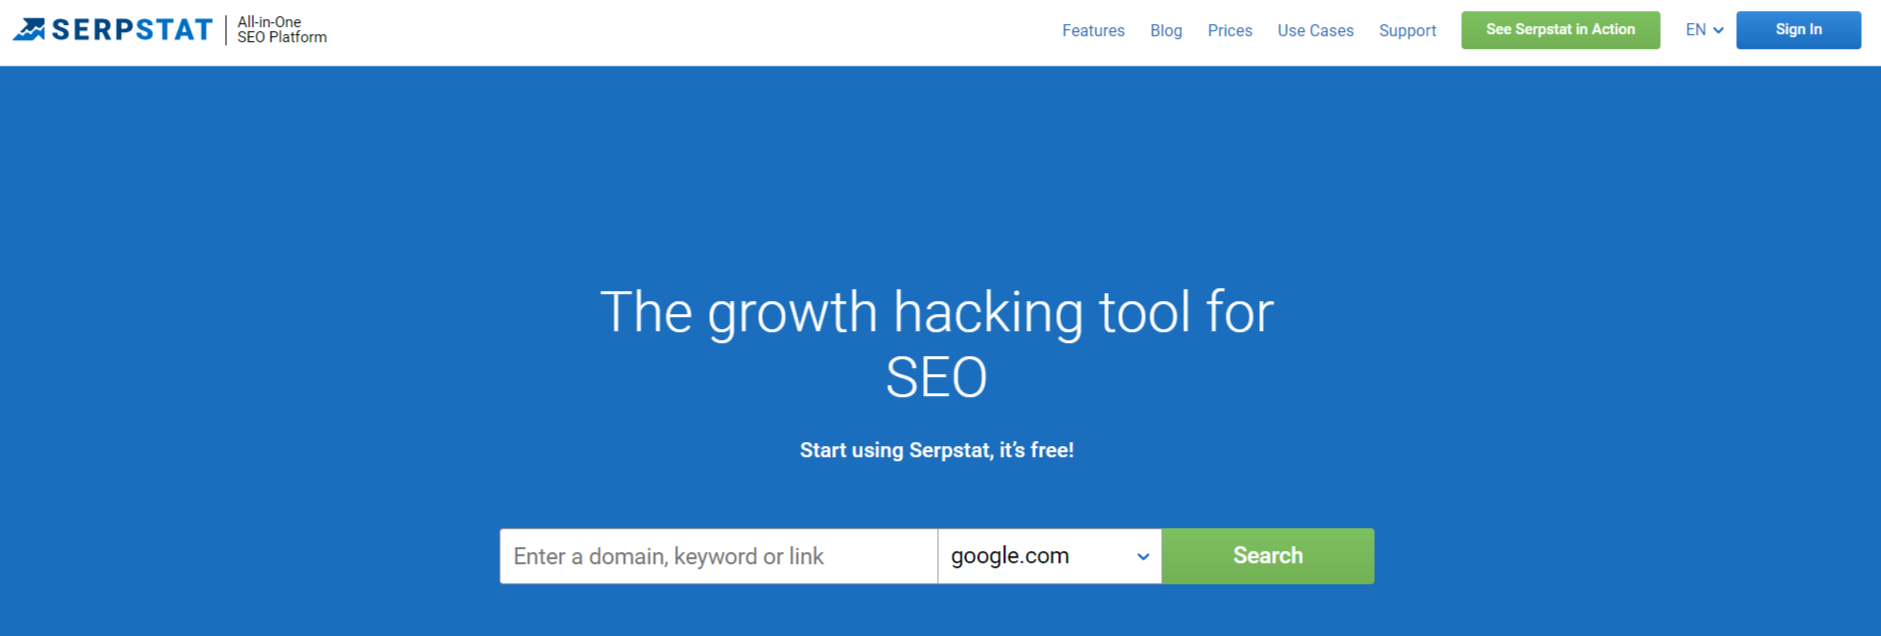 Serpstat Review— Growth hacking tool for SEO Serpstat Review— Growth hacking tool for SEO 